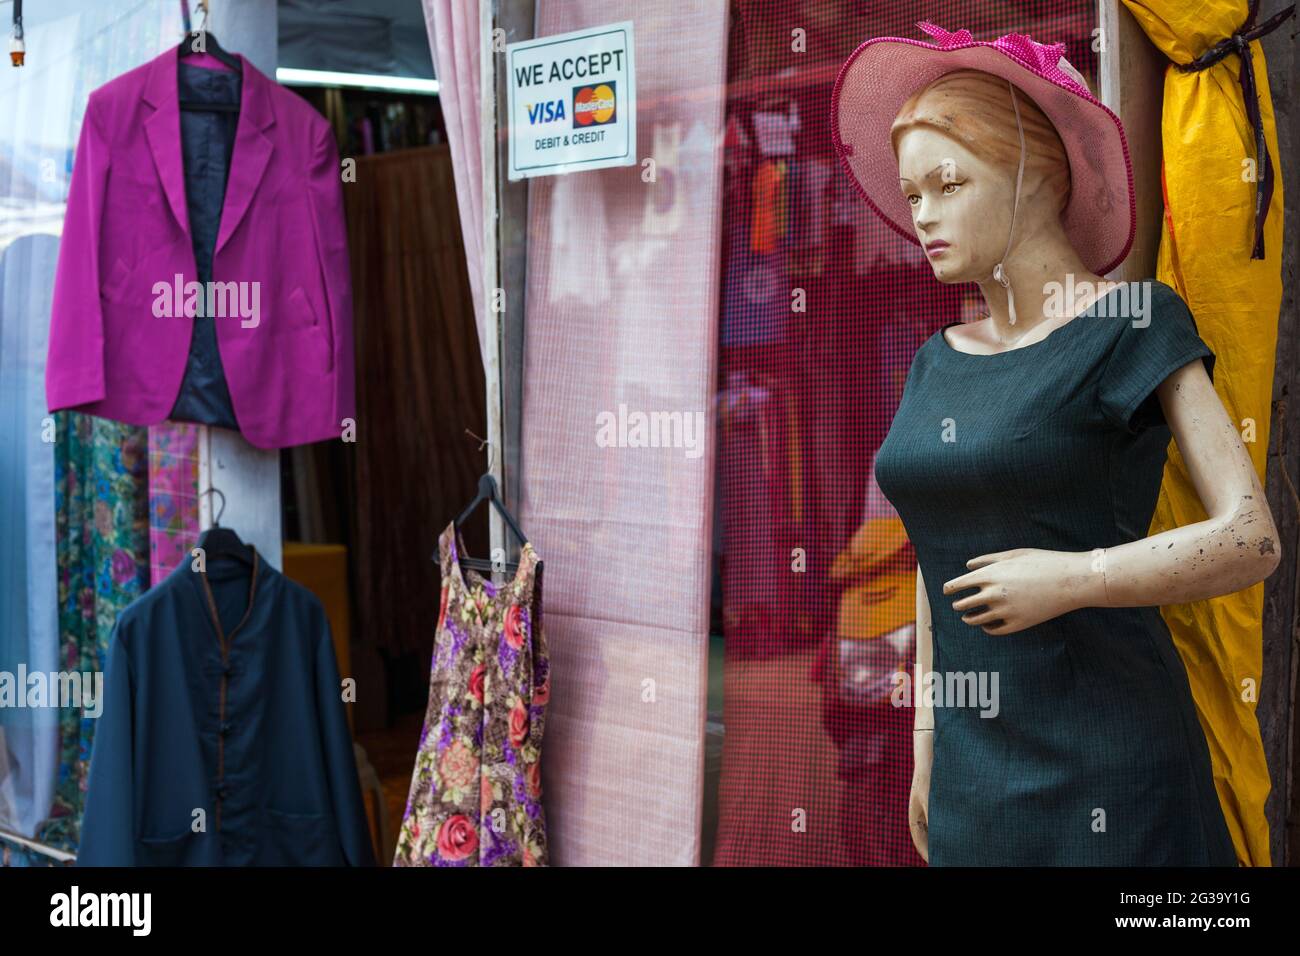 https://c8.alamy.com/comp/2G39Y1G/bizarre-face-on-clothes-mannequin-outside-clothing-store-patnem-goa-india-2G39Y1G.jpg